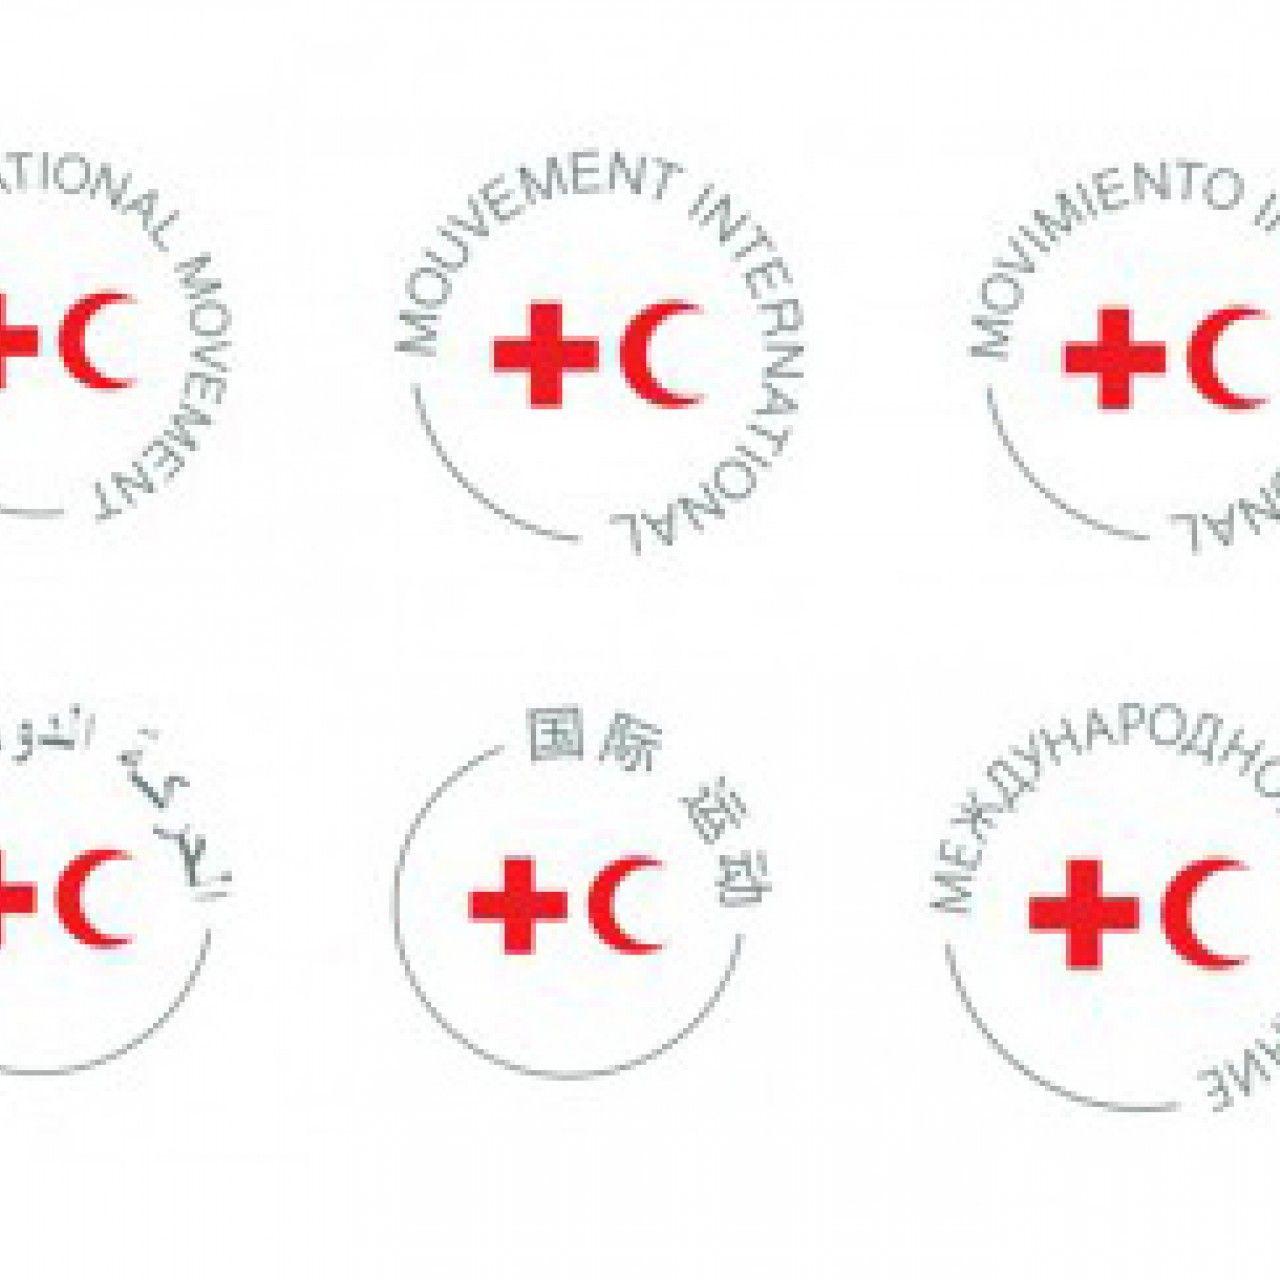 Movement Logo - A logo for the International Red Cross and Red Crescent Movement